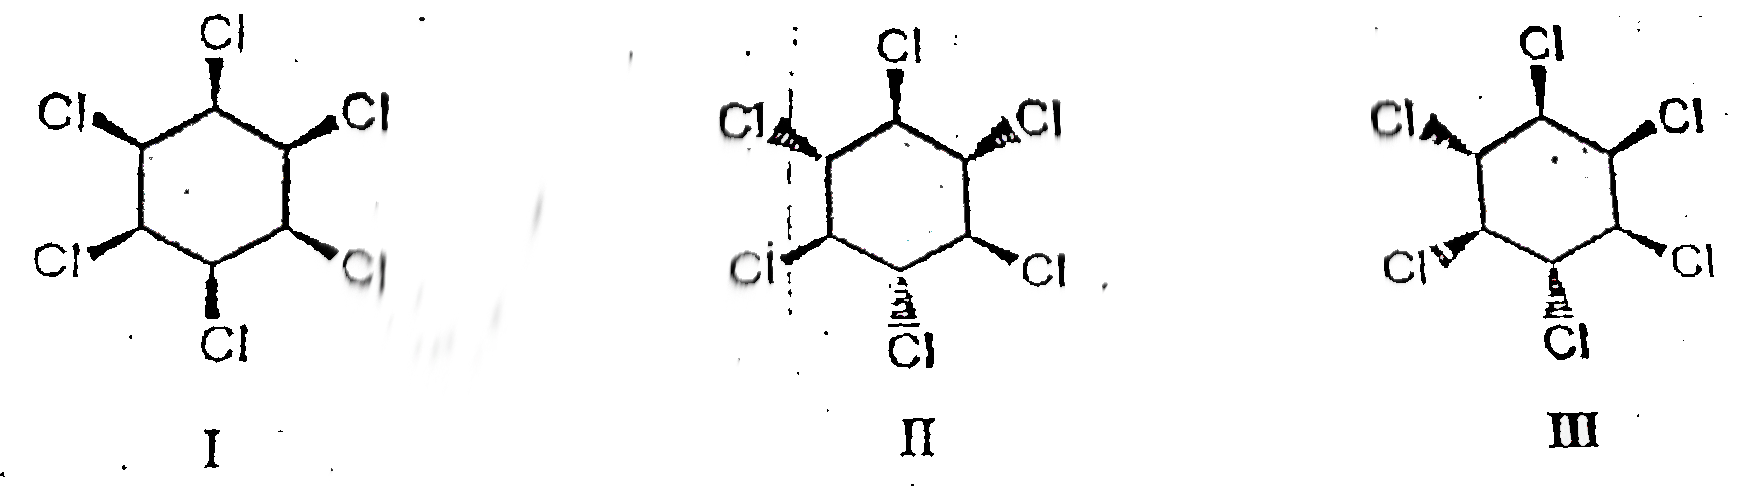 Which one of the following hyxachlorocyclohexane is least reactive and which one is most reactive in E2 reactions with a strong base fro dehydrohalogenation.